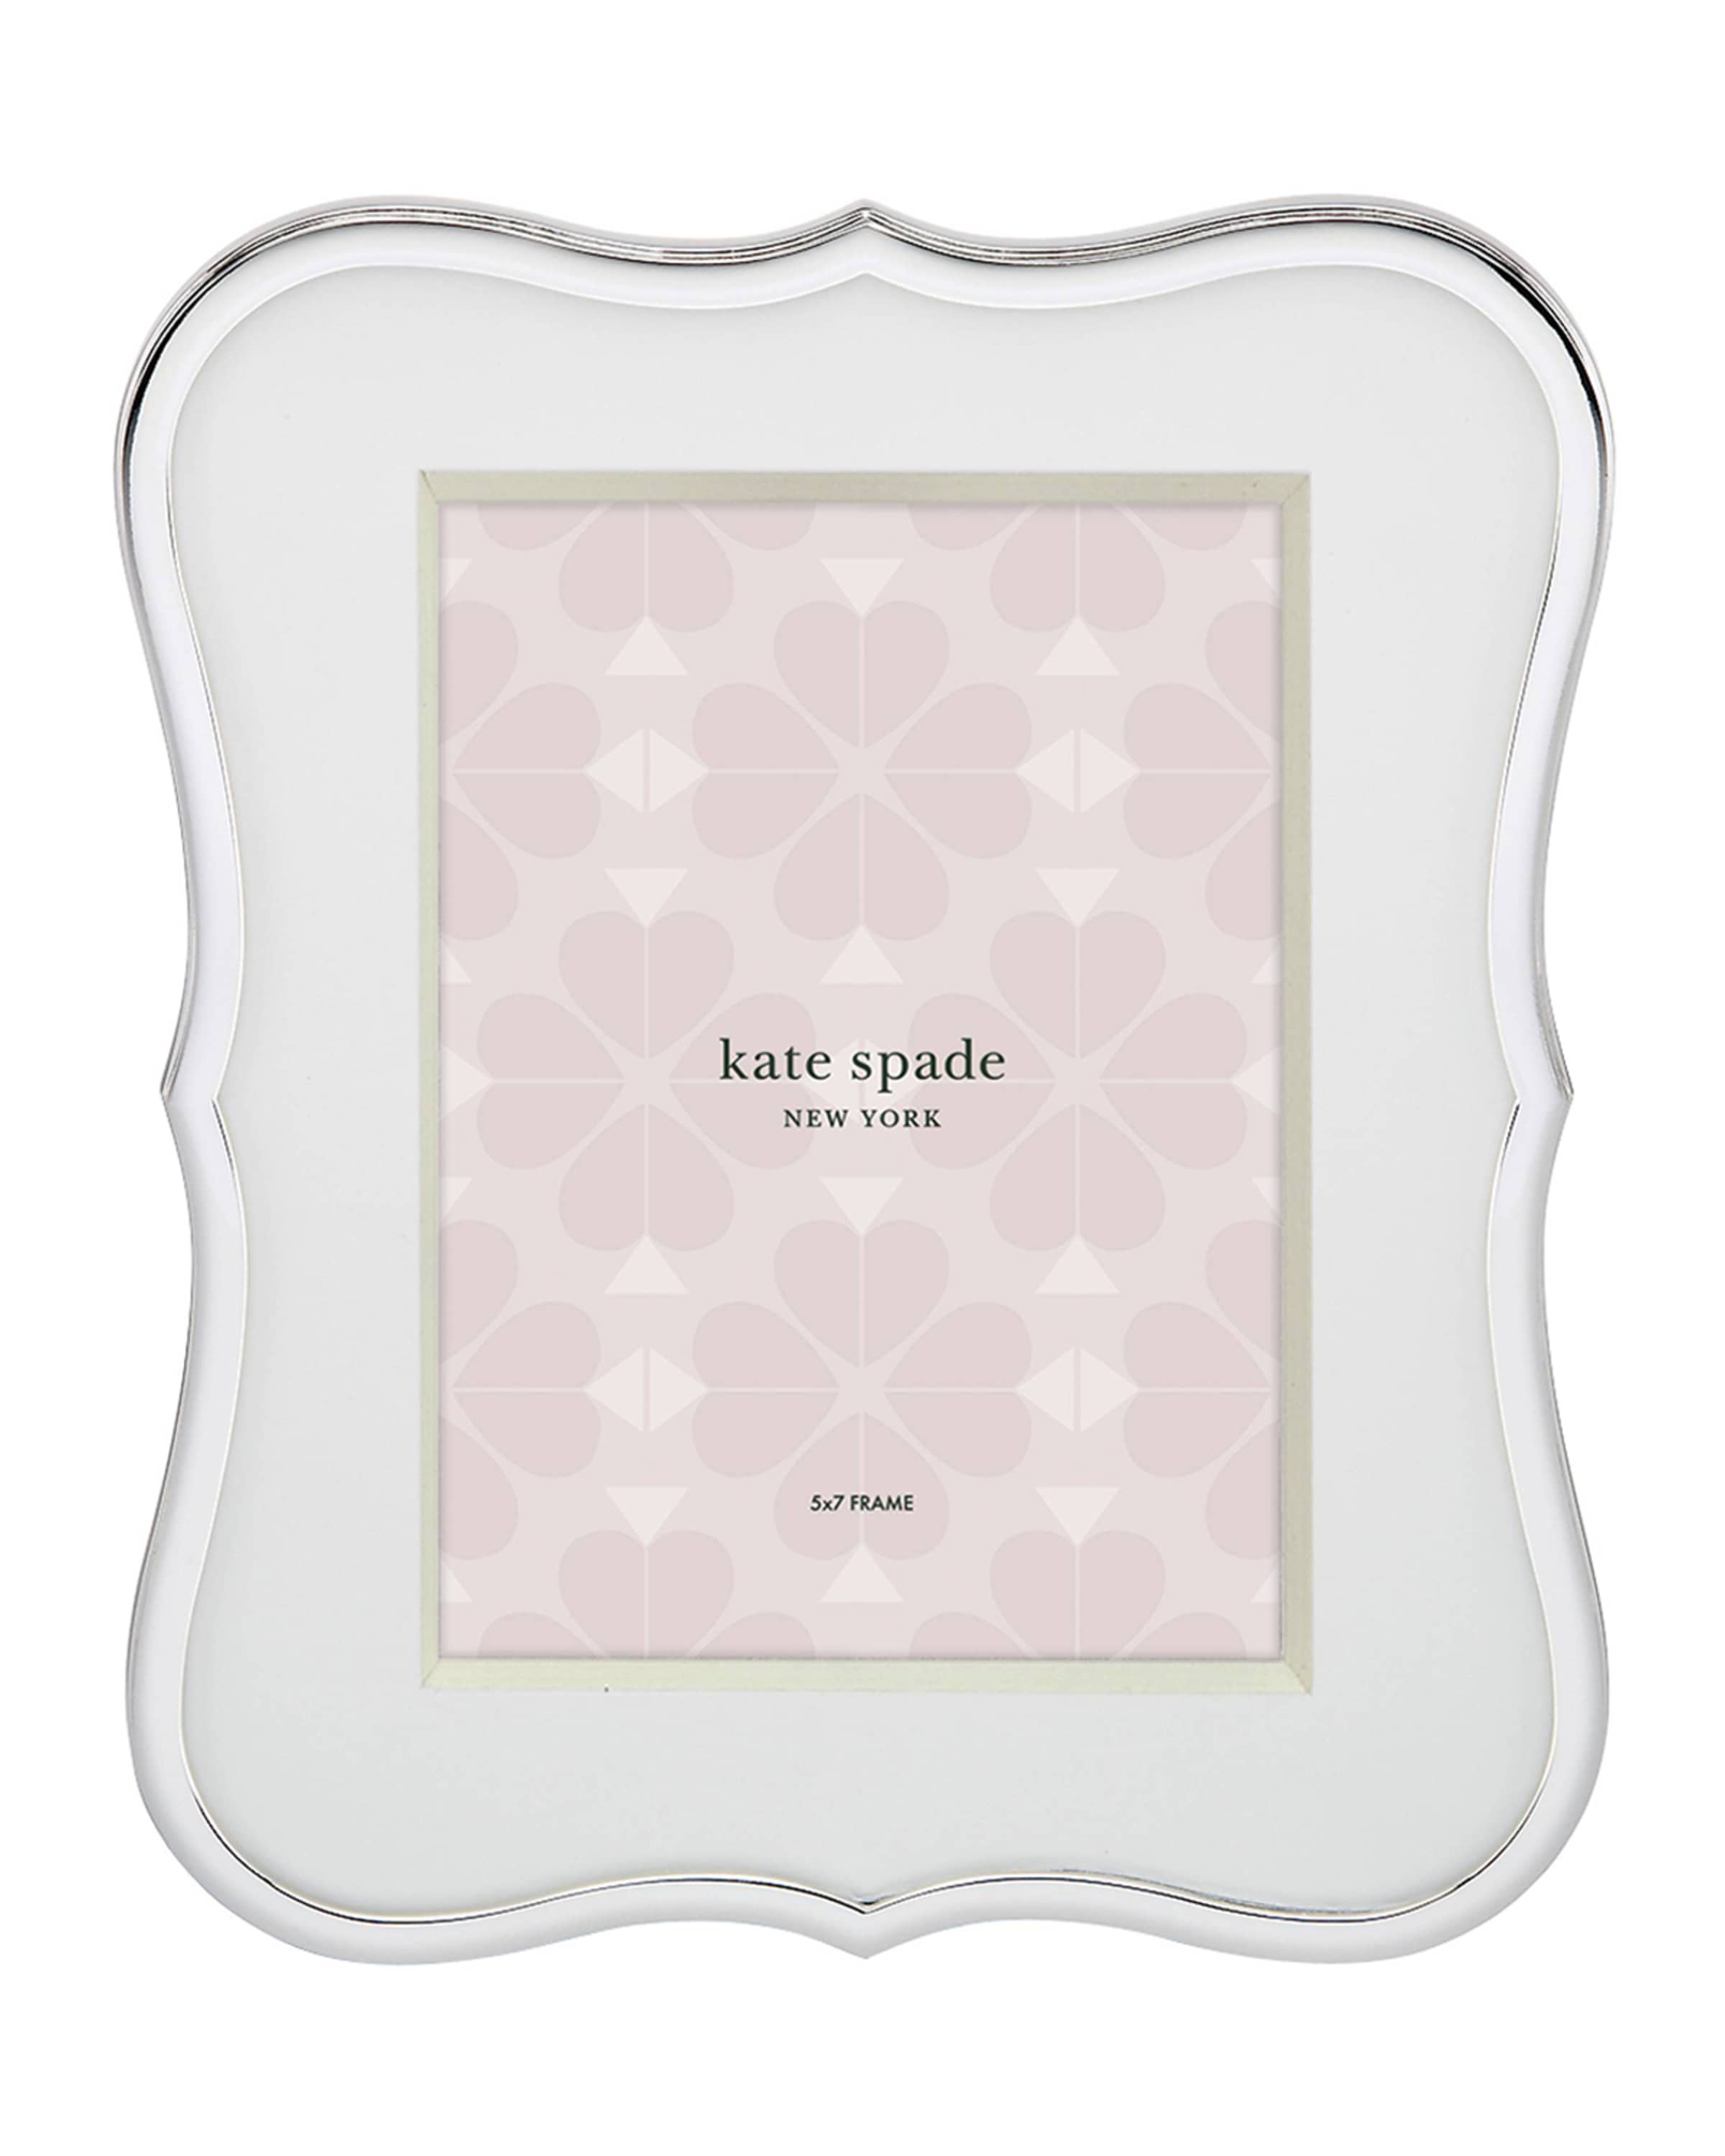 kate spade new york Crown Point 5" x 7" Picture Frame